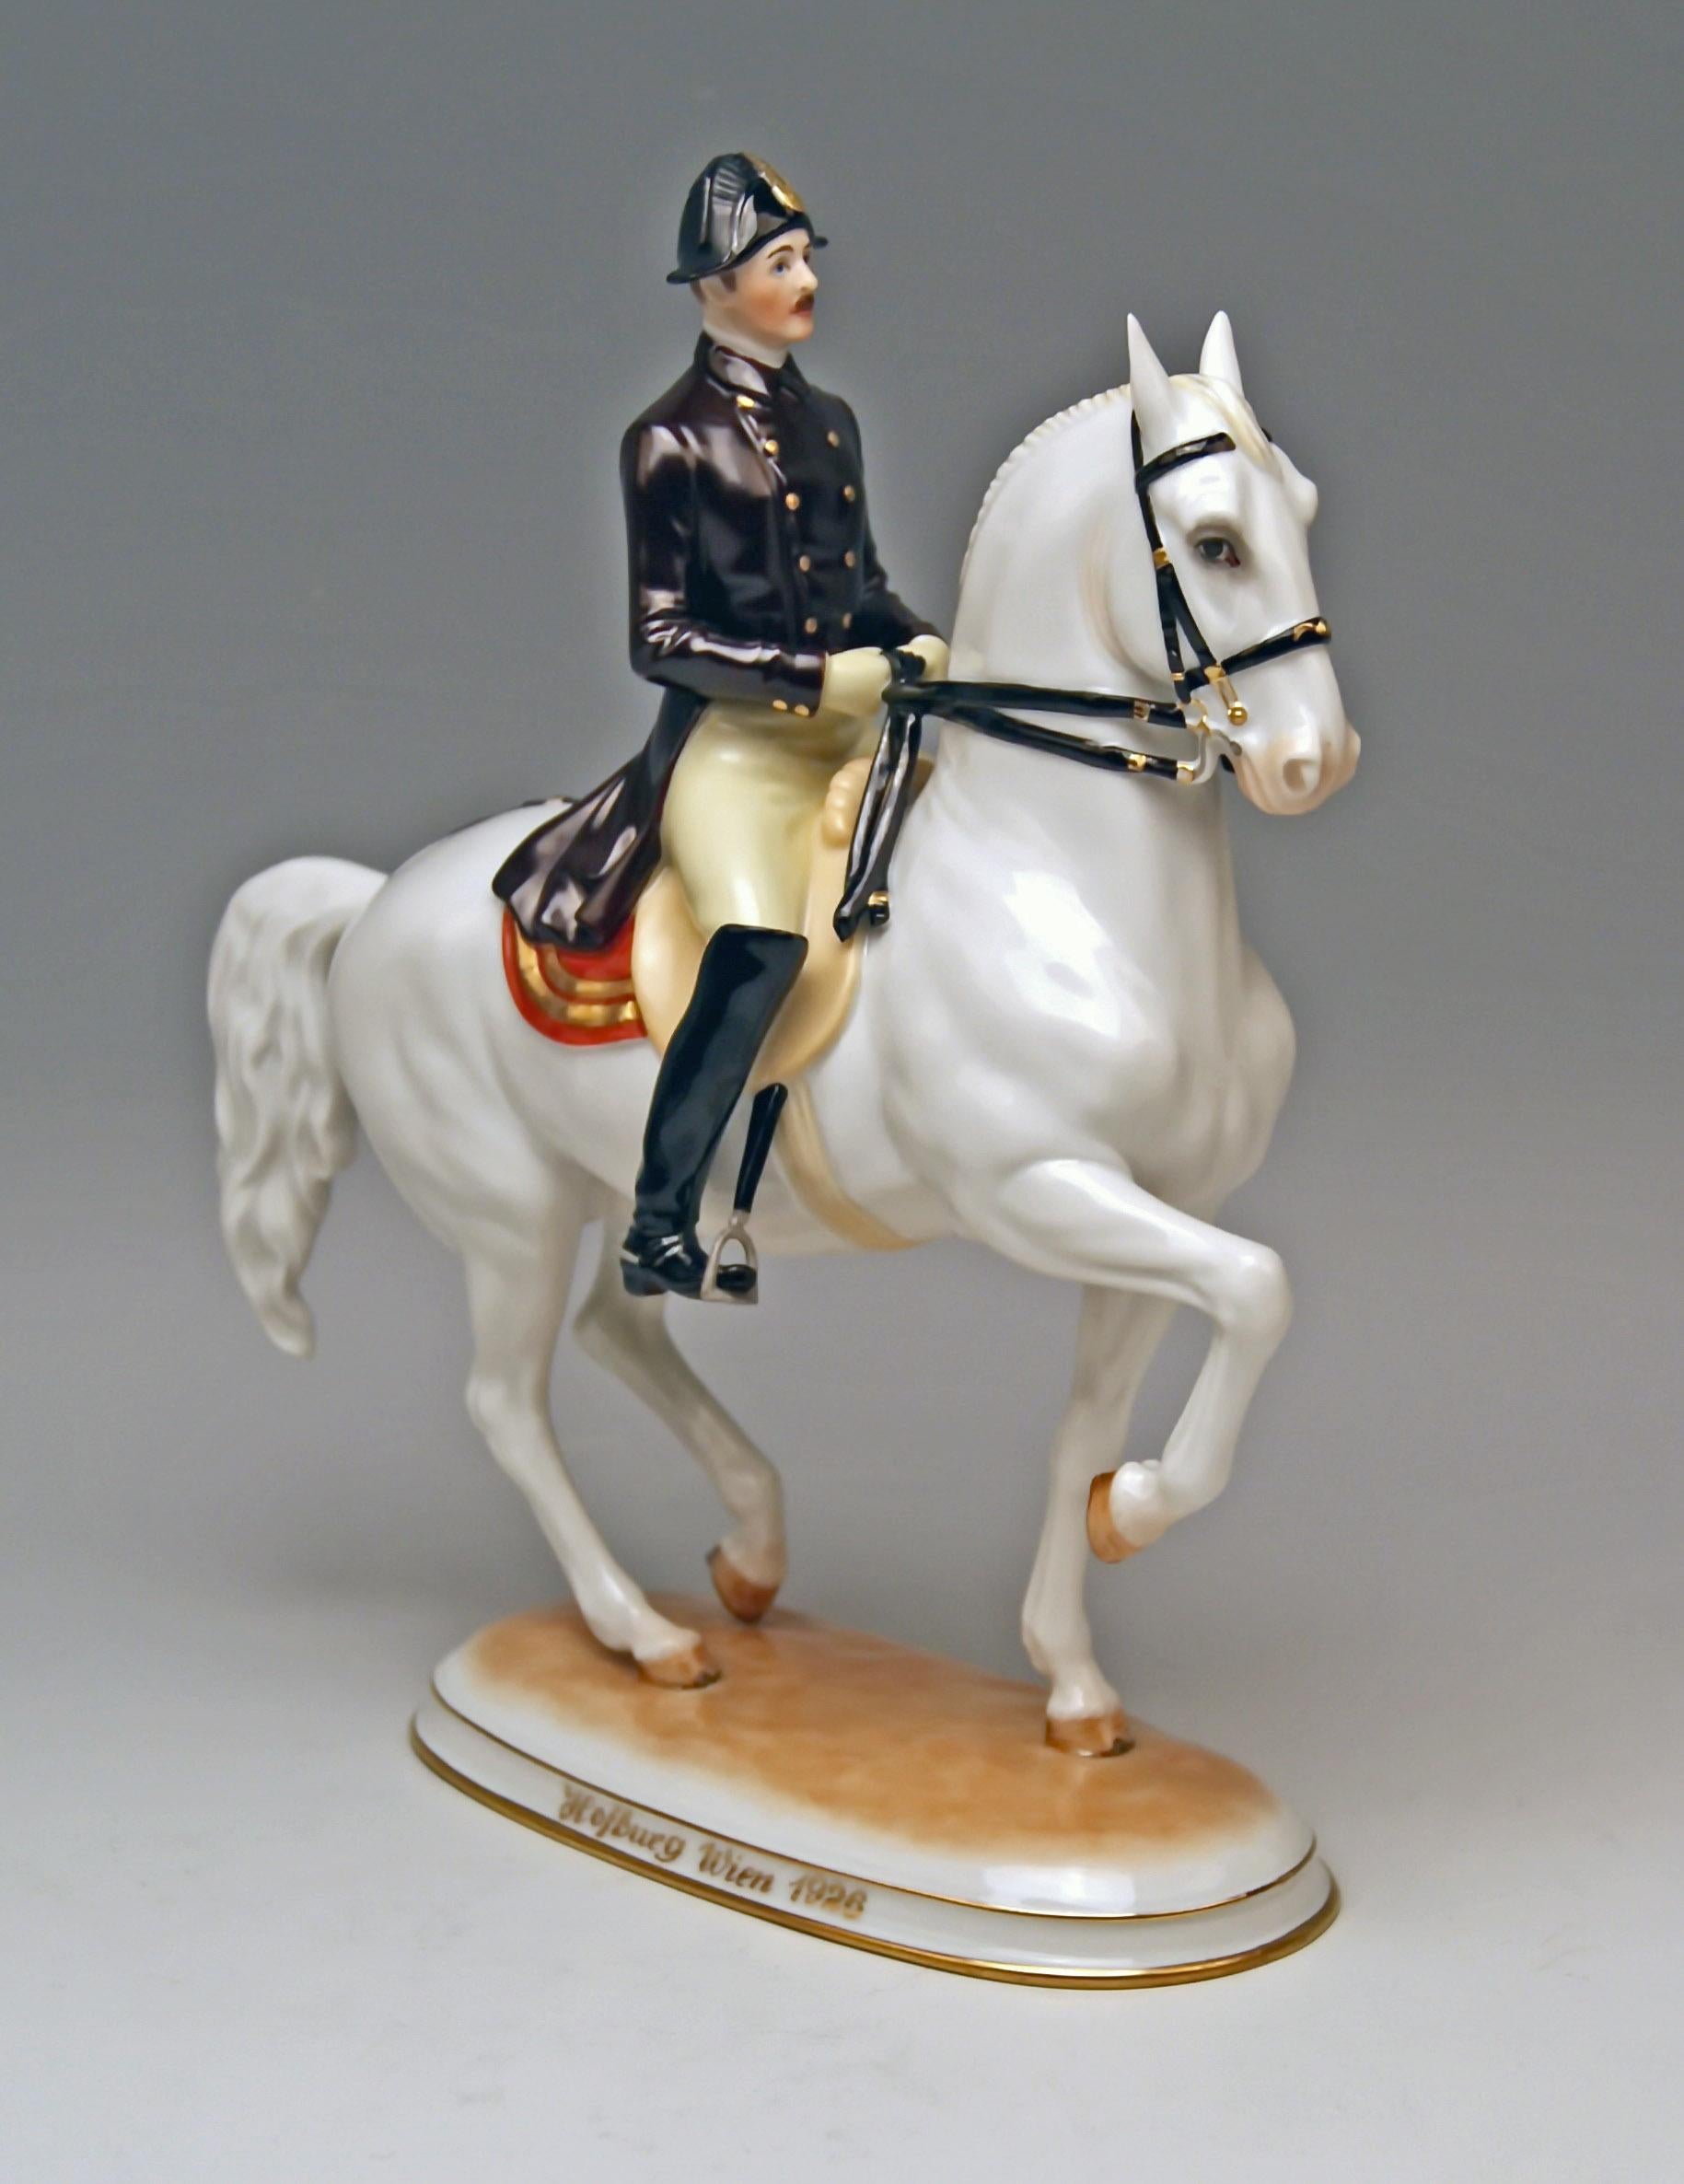 Vienna Augarten Horse Spanish Riding School
Figurine type: Piaffe

The piaffe is a dressage movement where the horse is in a highly collected and cadenced trot, in place or nearly in place. The center of gravity of the horse should be more